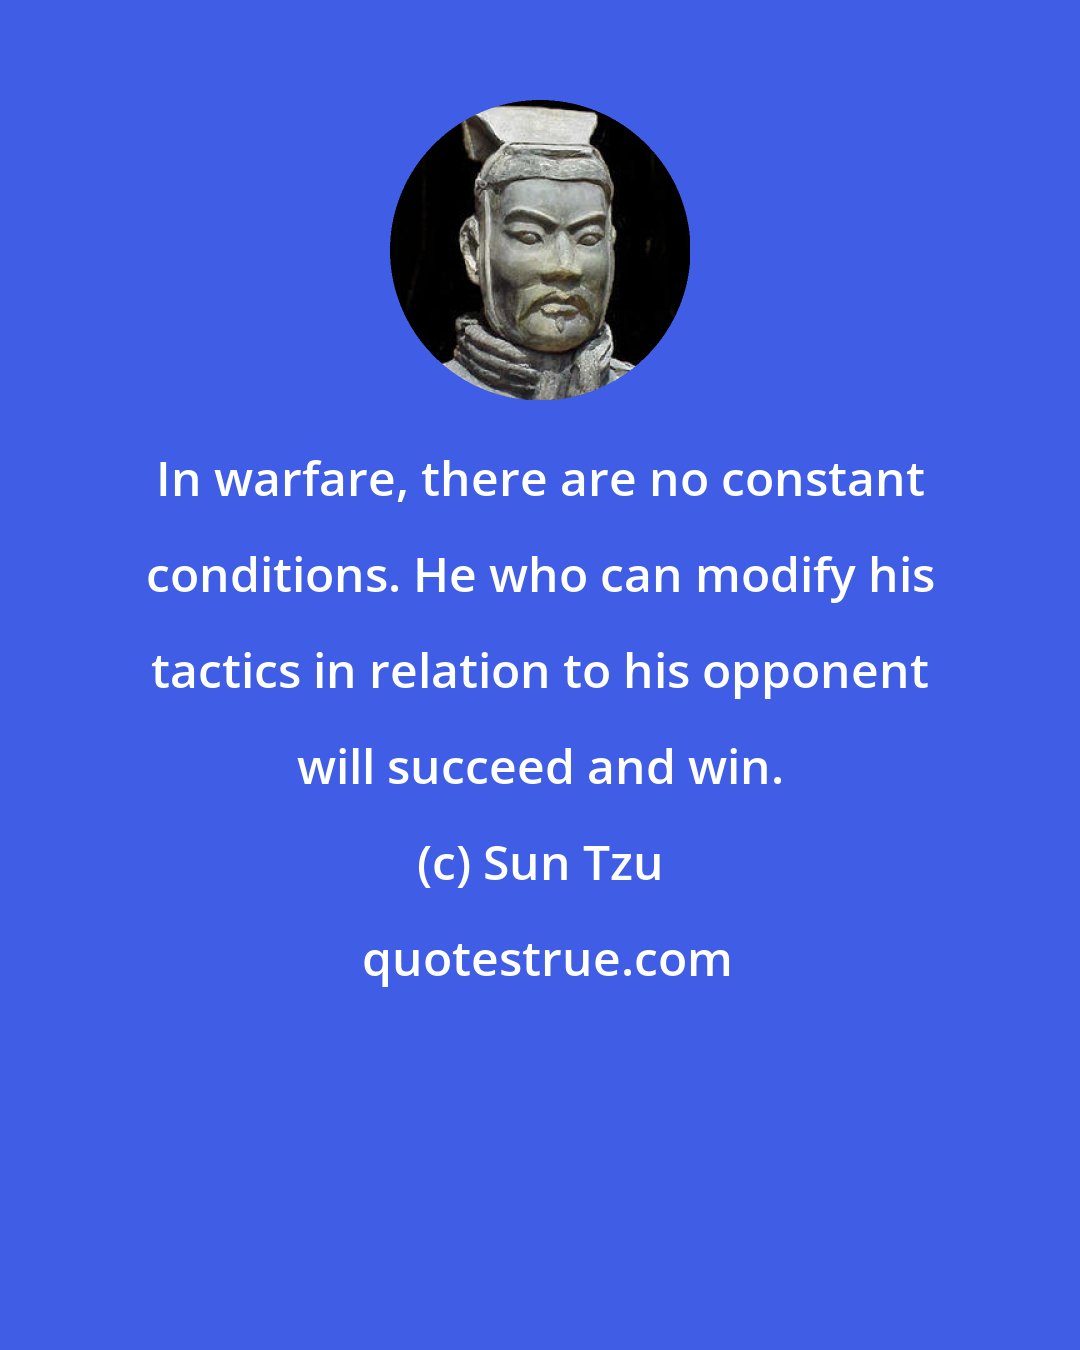 Sun Tzu: In warfare, there are no constant conditions. He who can modify his tactics in relation to his opponent will succeed and win.